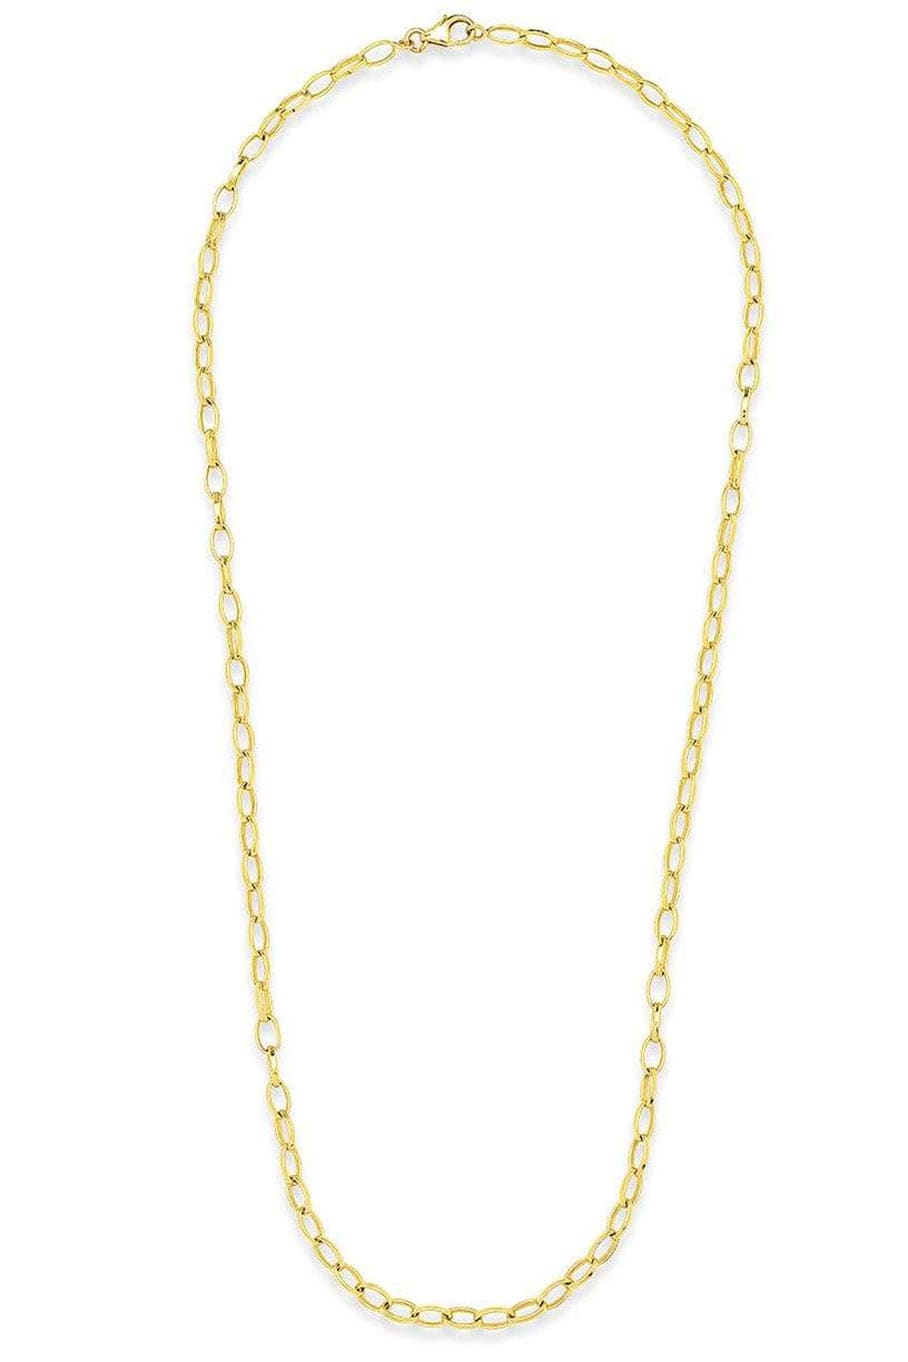 JENNIFER MEYER-Small Edith Link Necklace-YELLOW GOLD